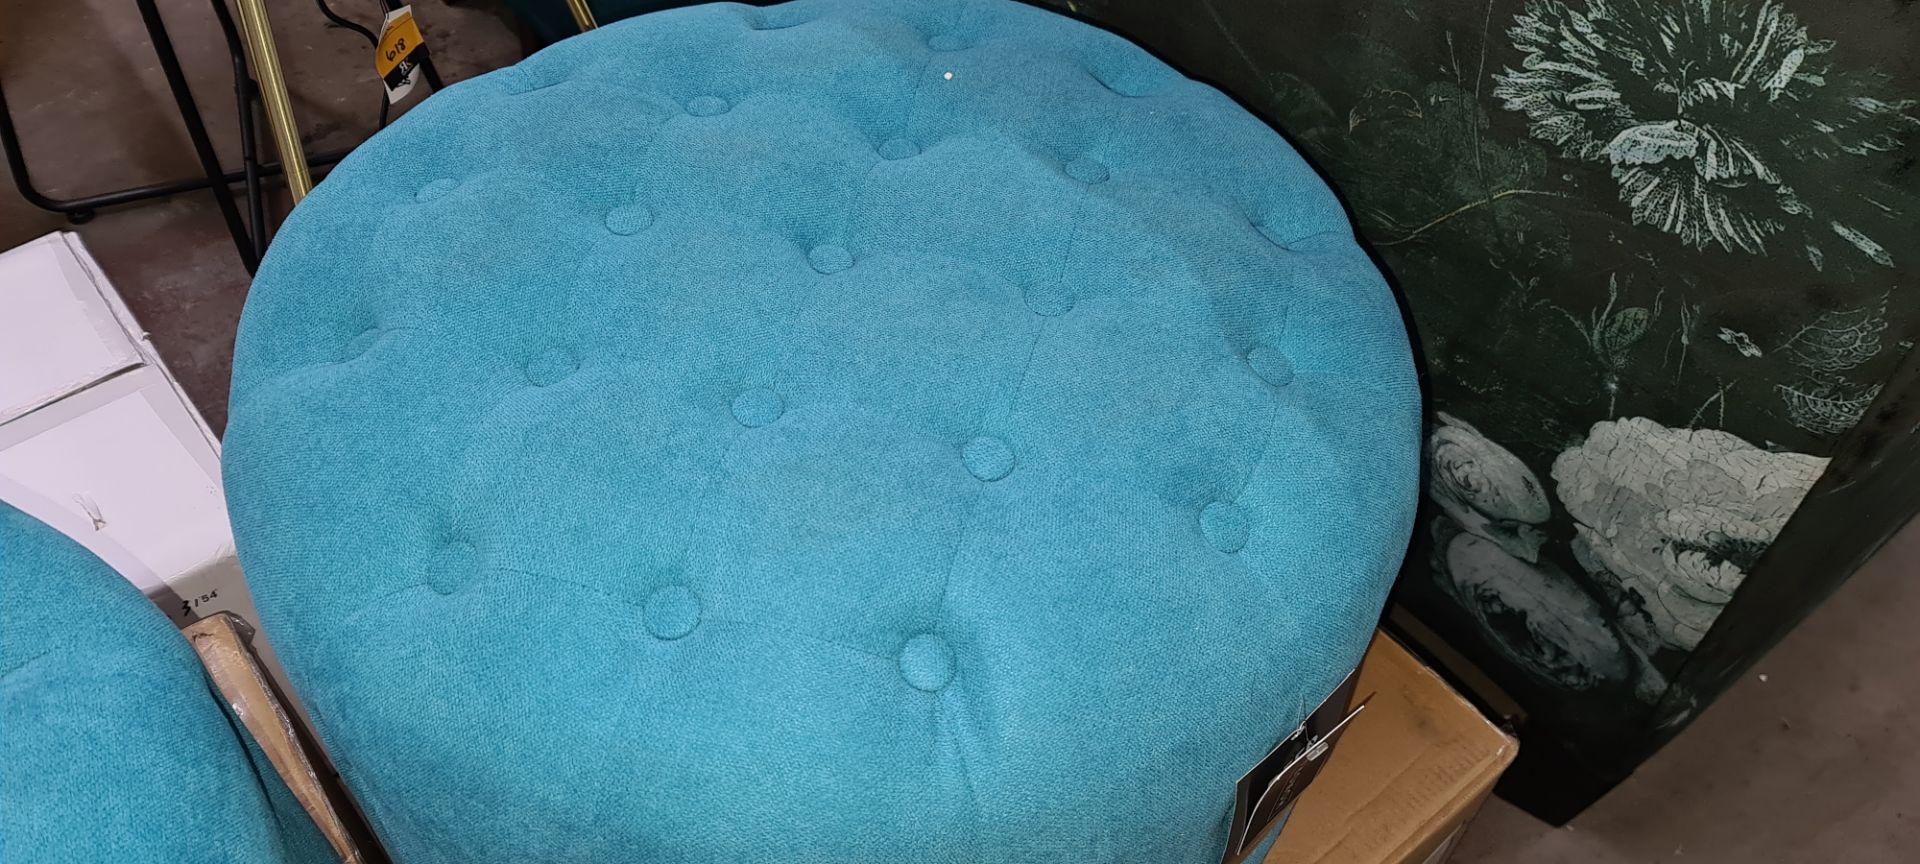 Pair of Verona turquoise blue round pouffe, priced at £64.99 each - Image 5 of 5